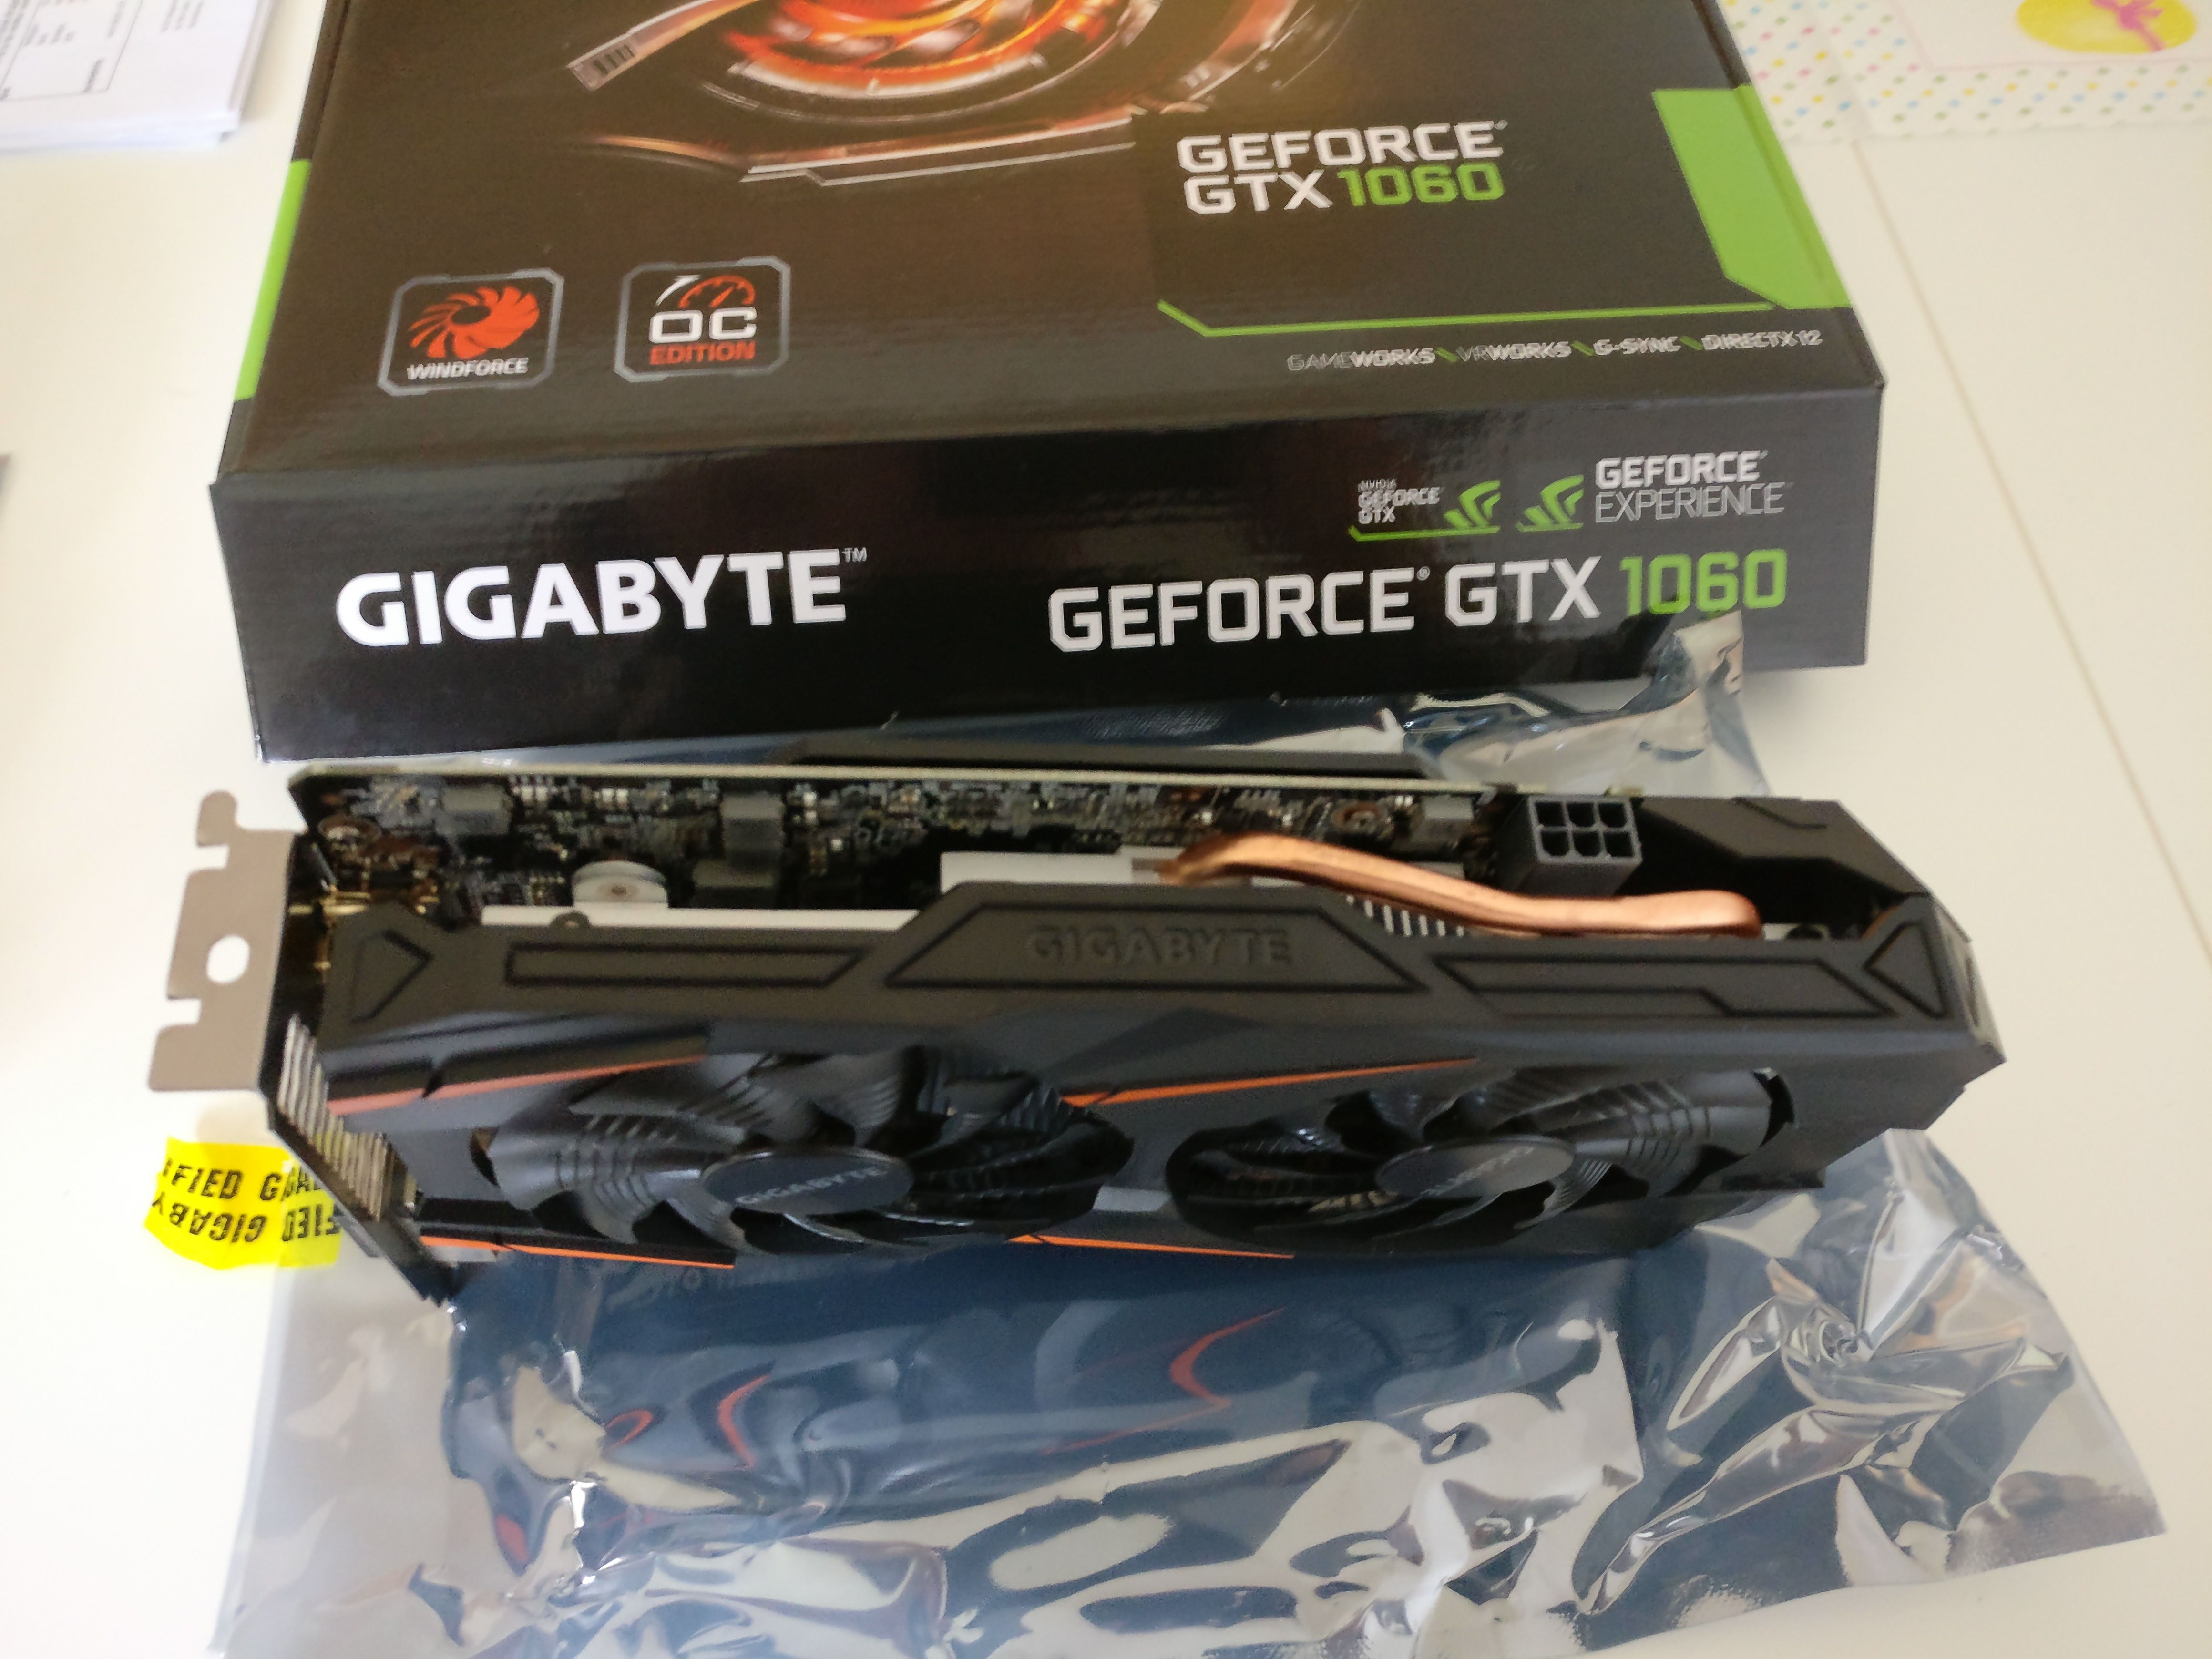 My new Nvidia 1060 mining card arrived today — Steemit